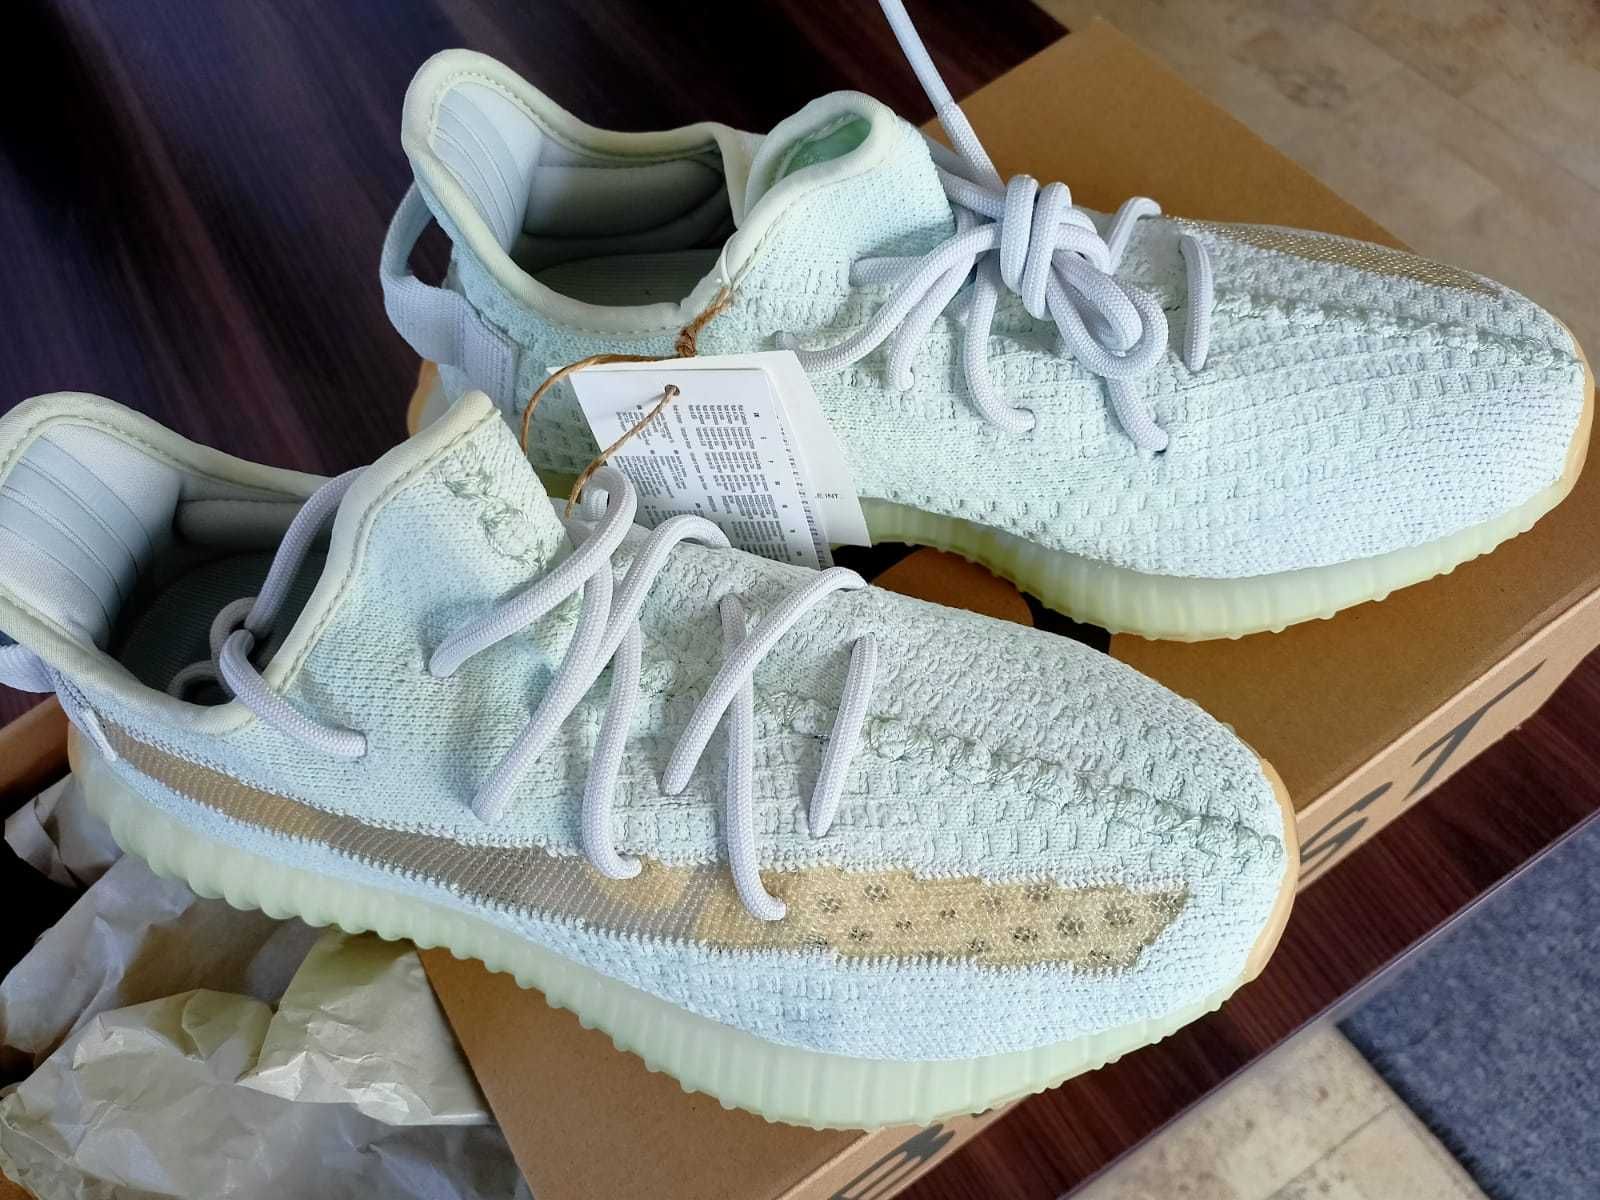 Yeezy Boost 350 V2 'Hyperspace' (2019)